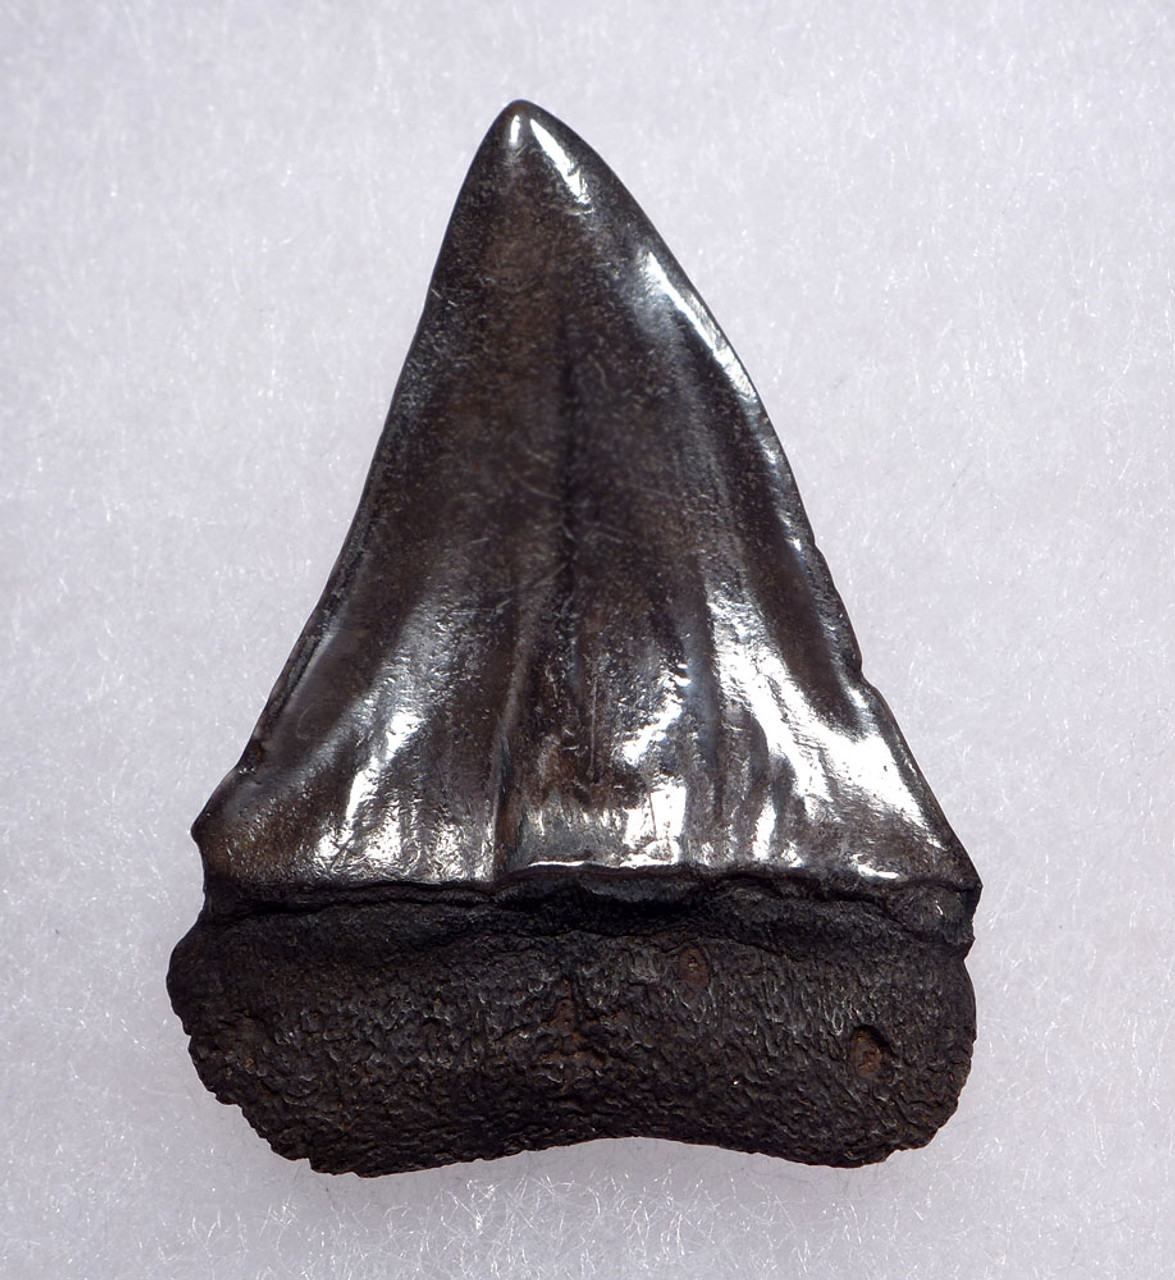 CHOICE 1.75 INCH USA FOSSIL SHARK TOOTH OF ISURUS HASTALIS BROAD TOOTH MAKO WITH CHATOYANT BRONZE ENAMEL  *SHX164